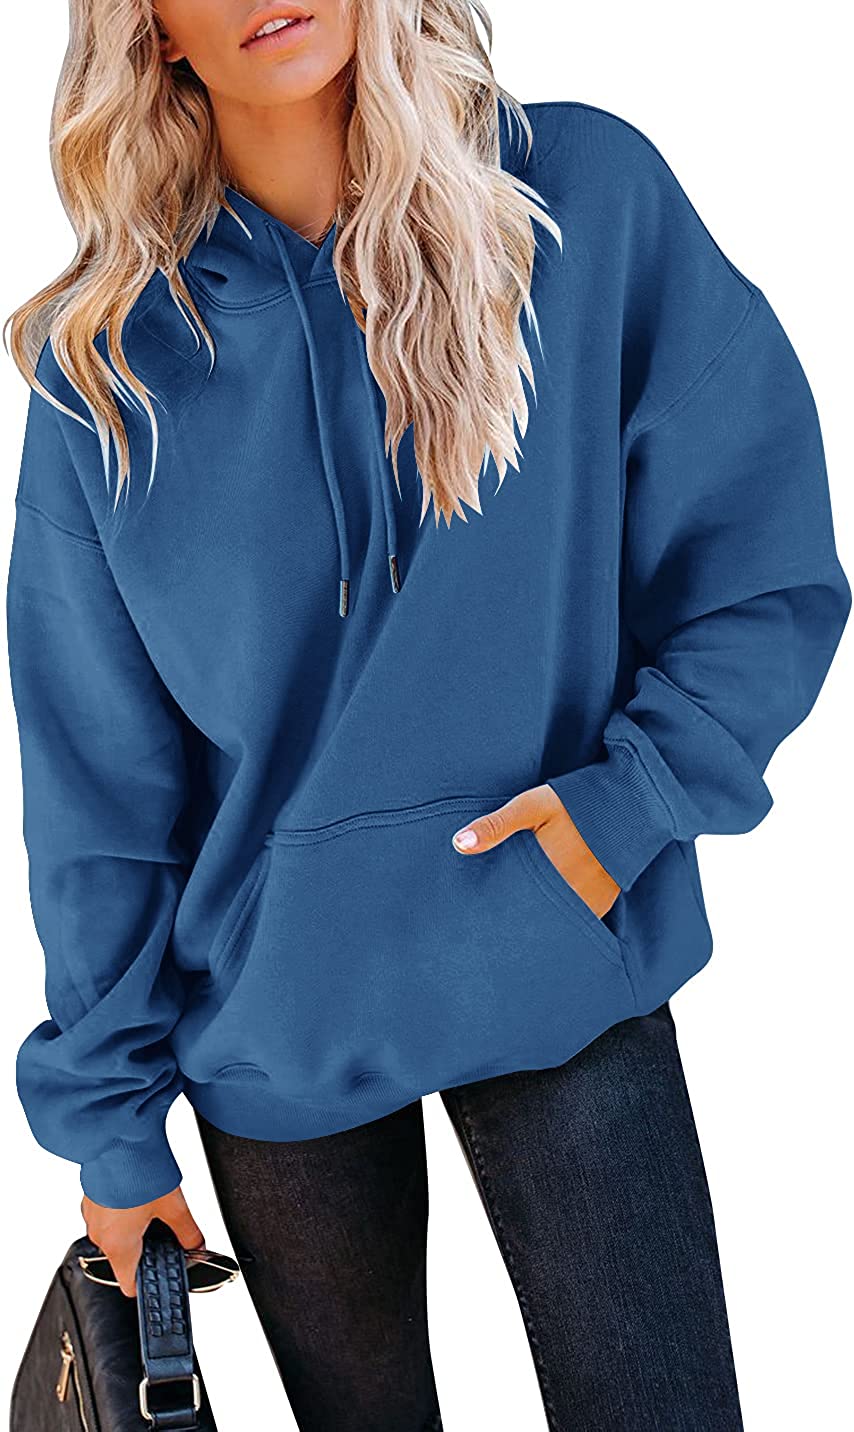 Yuccalley Women's Long Sleeve Fashion Pocket Hoodies Casual